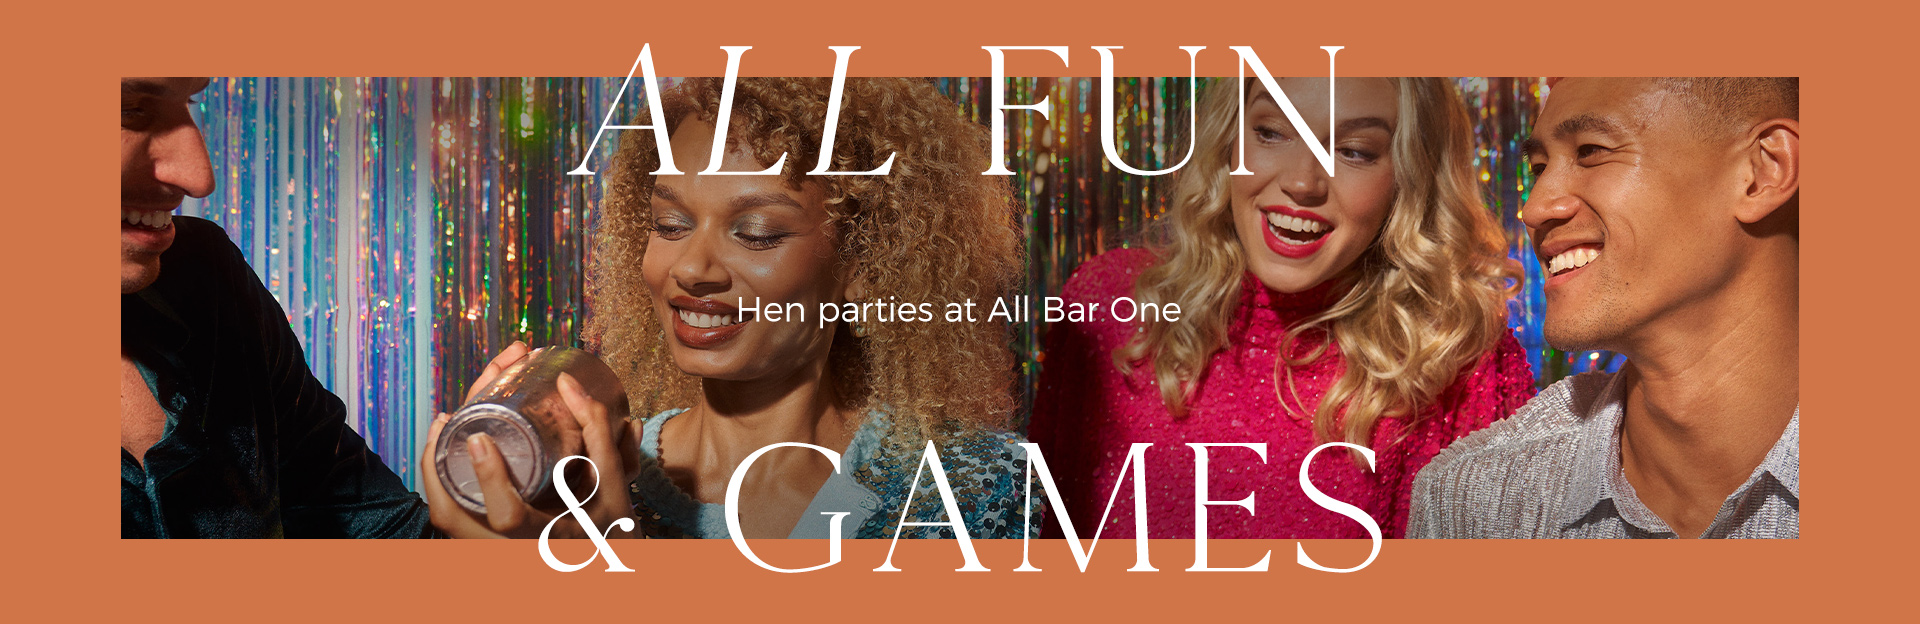 Hen parties at All Bar One Manchester